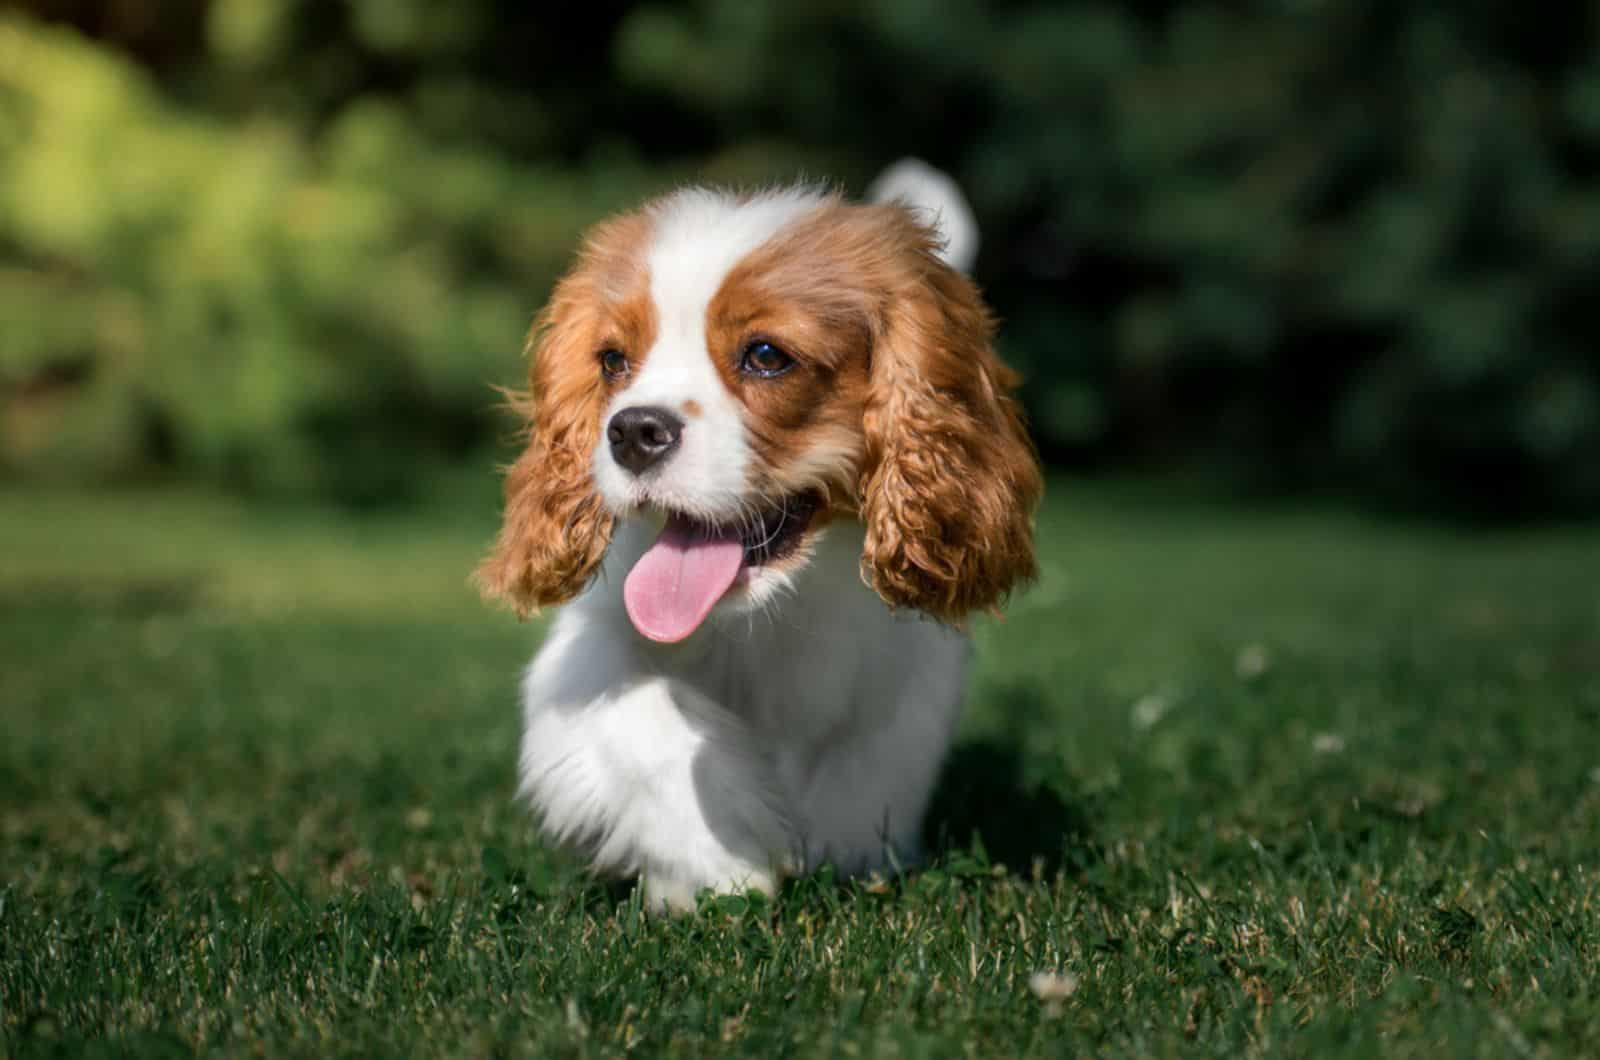 cavalier king charles spaniel puppy running on the lawn